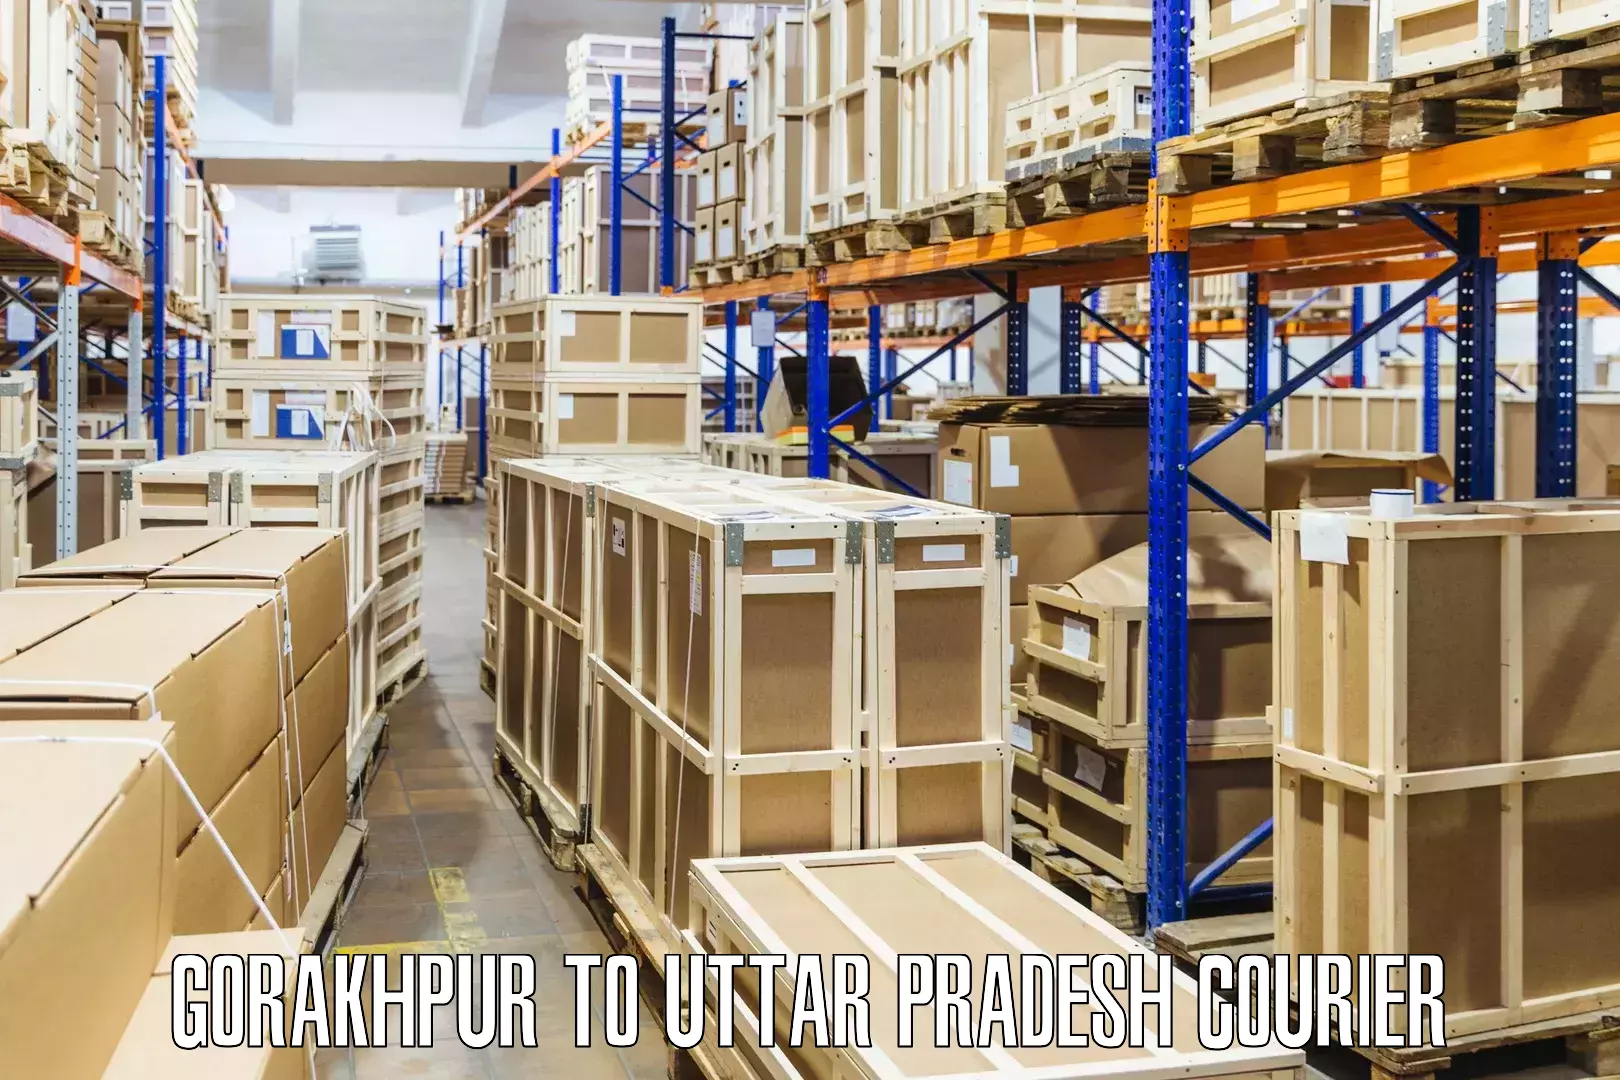 State-of-the-art courier technology Gorakhpur to Pilibhit